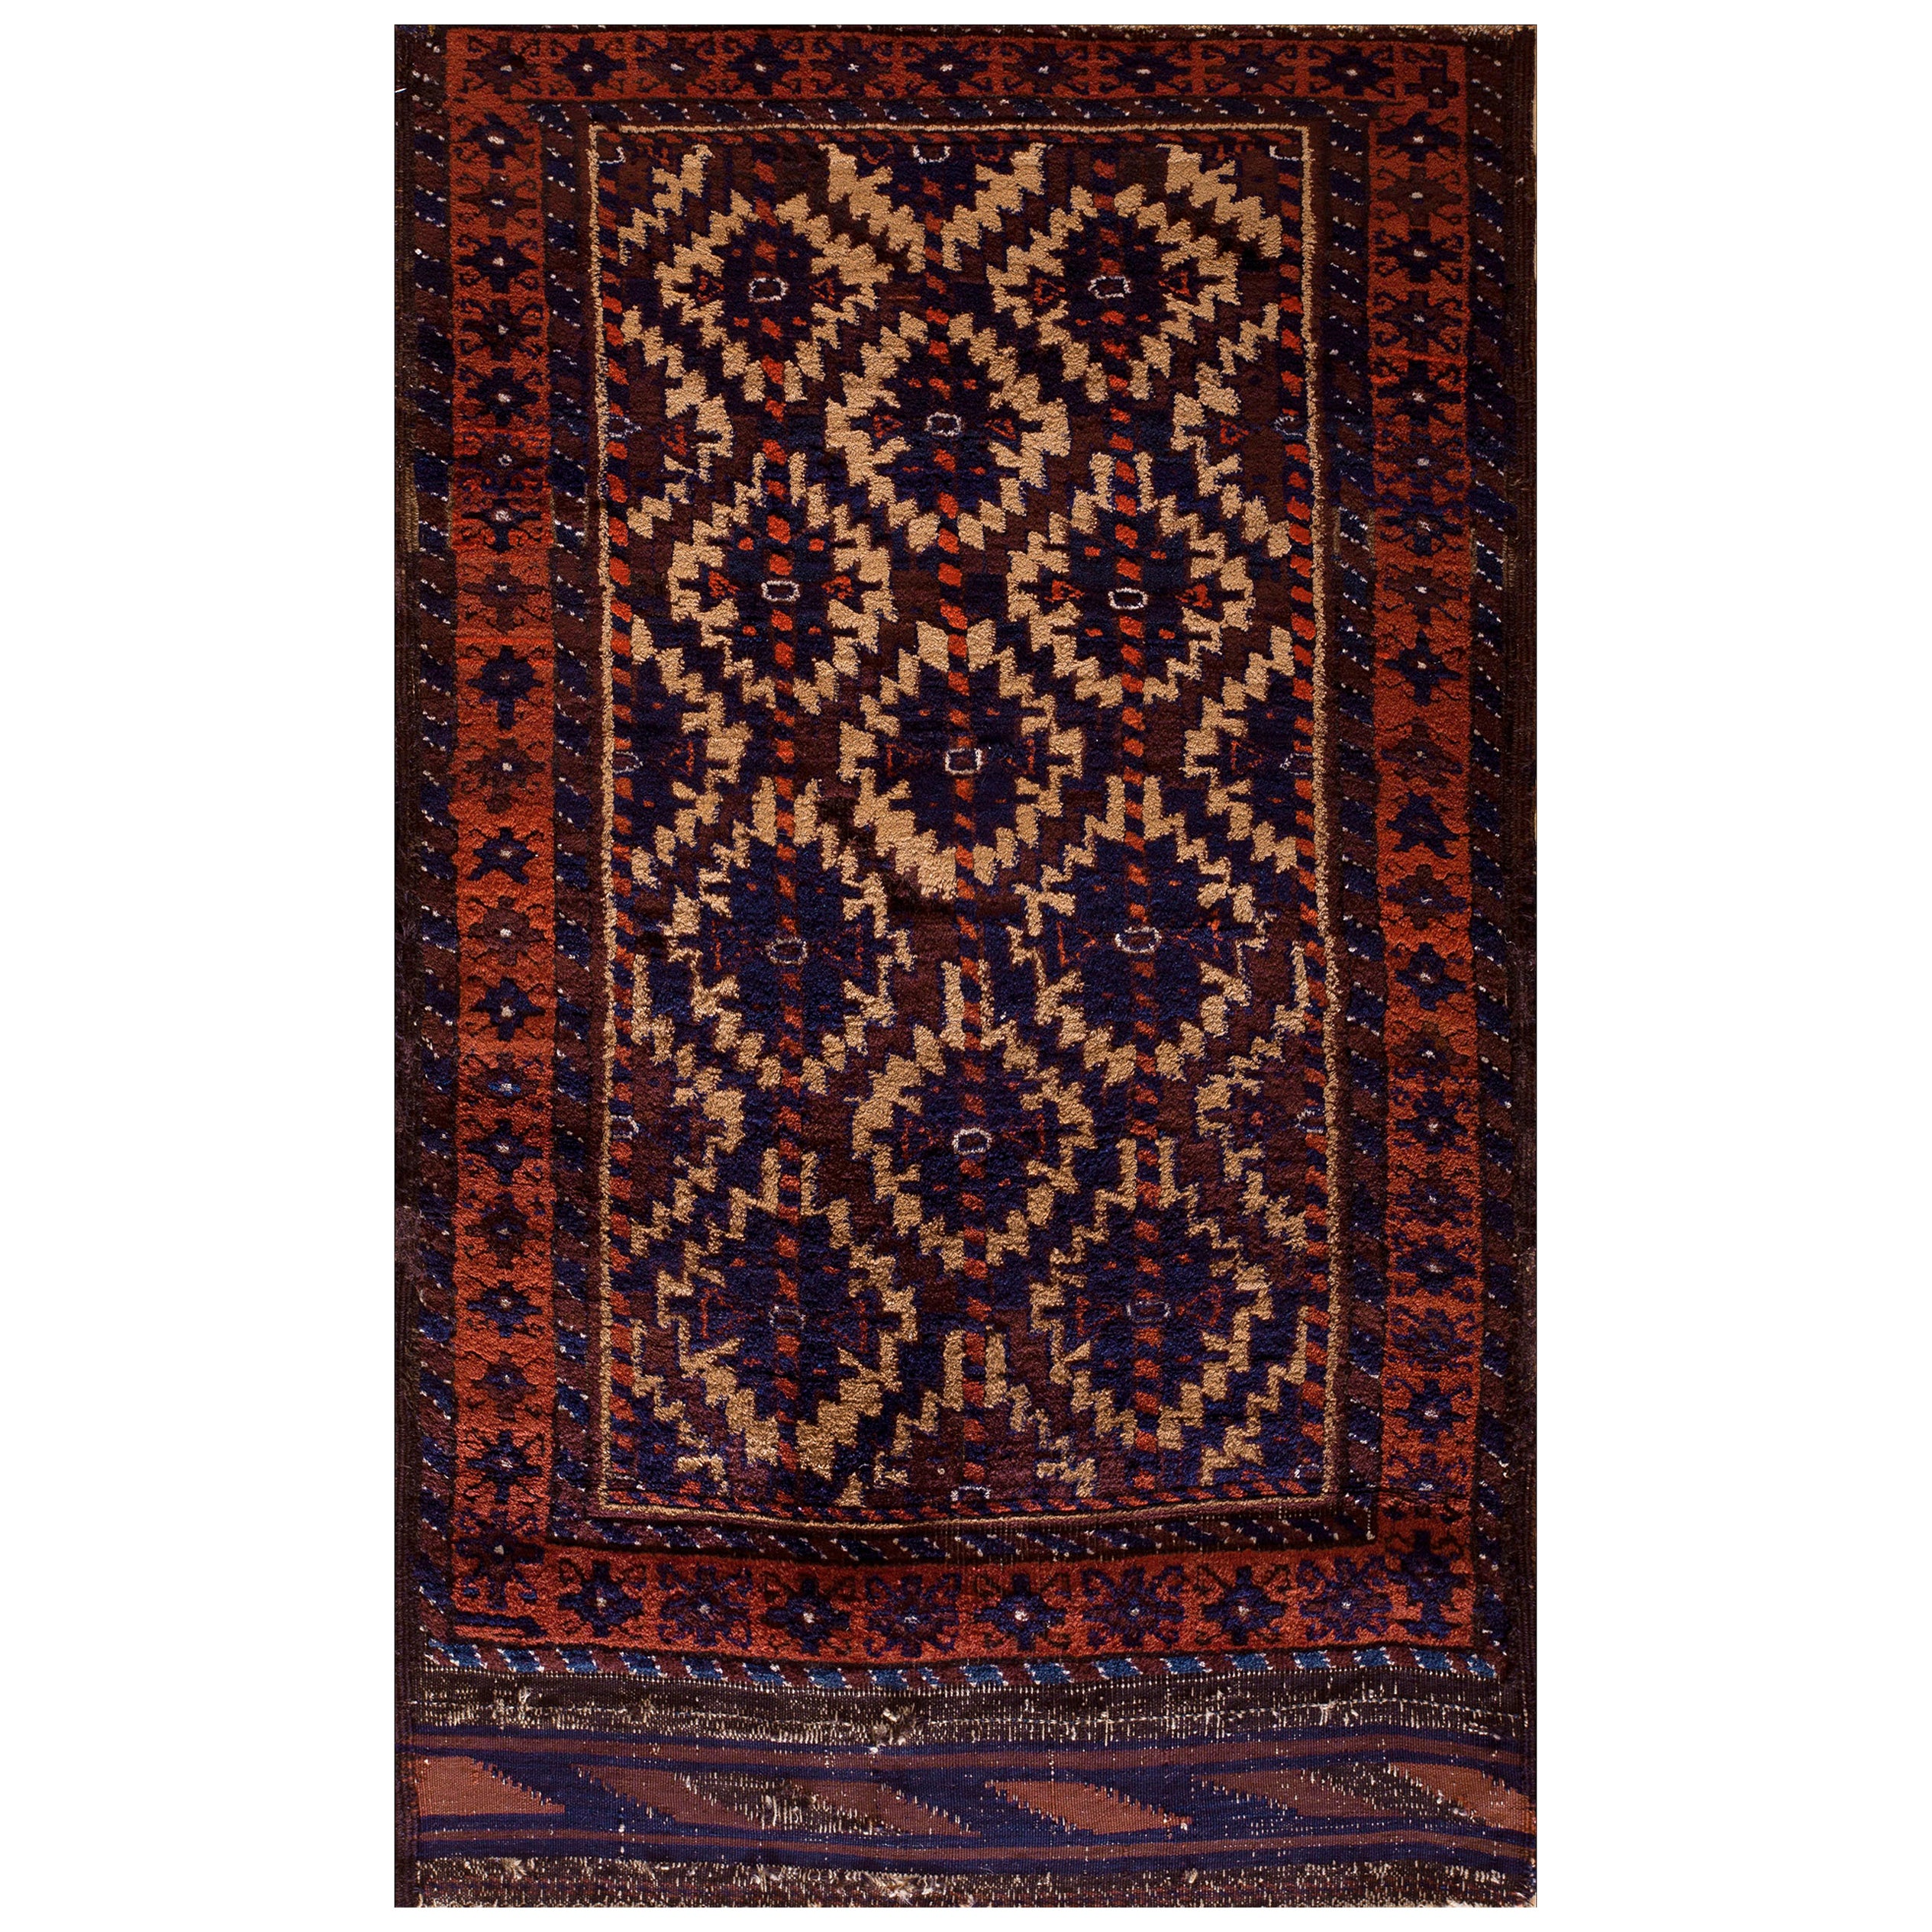 Late 19th Century Baluch Carpet ( 2'7" x 4' 1" - 78 x 124 cm )  For Sale